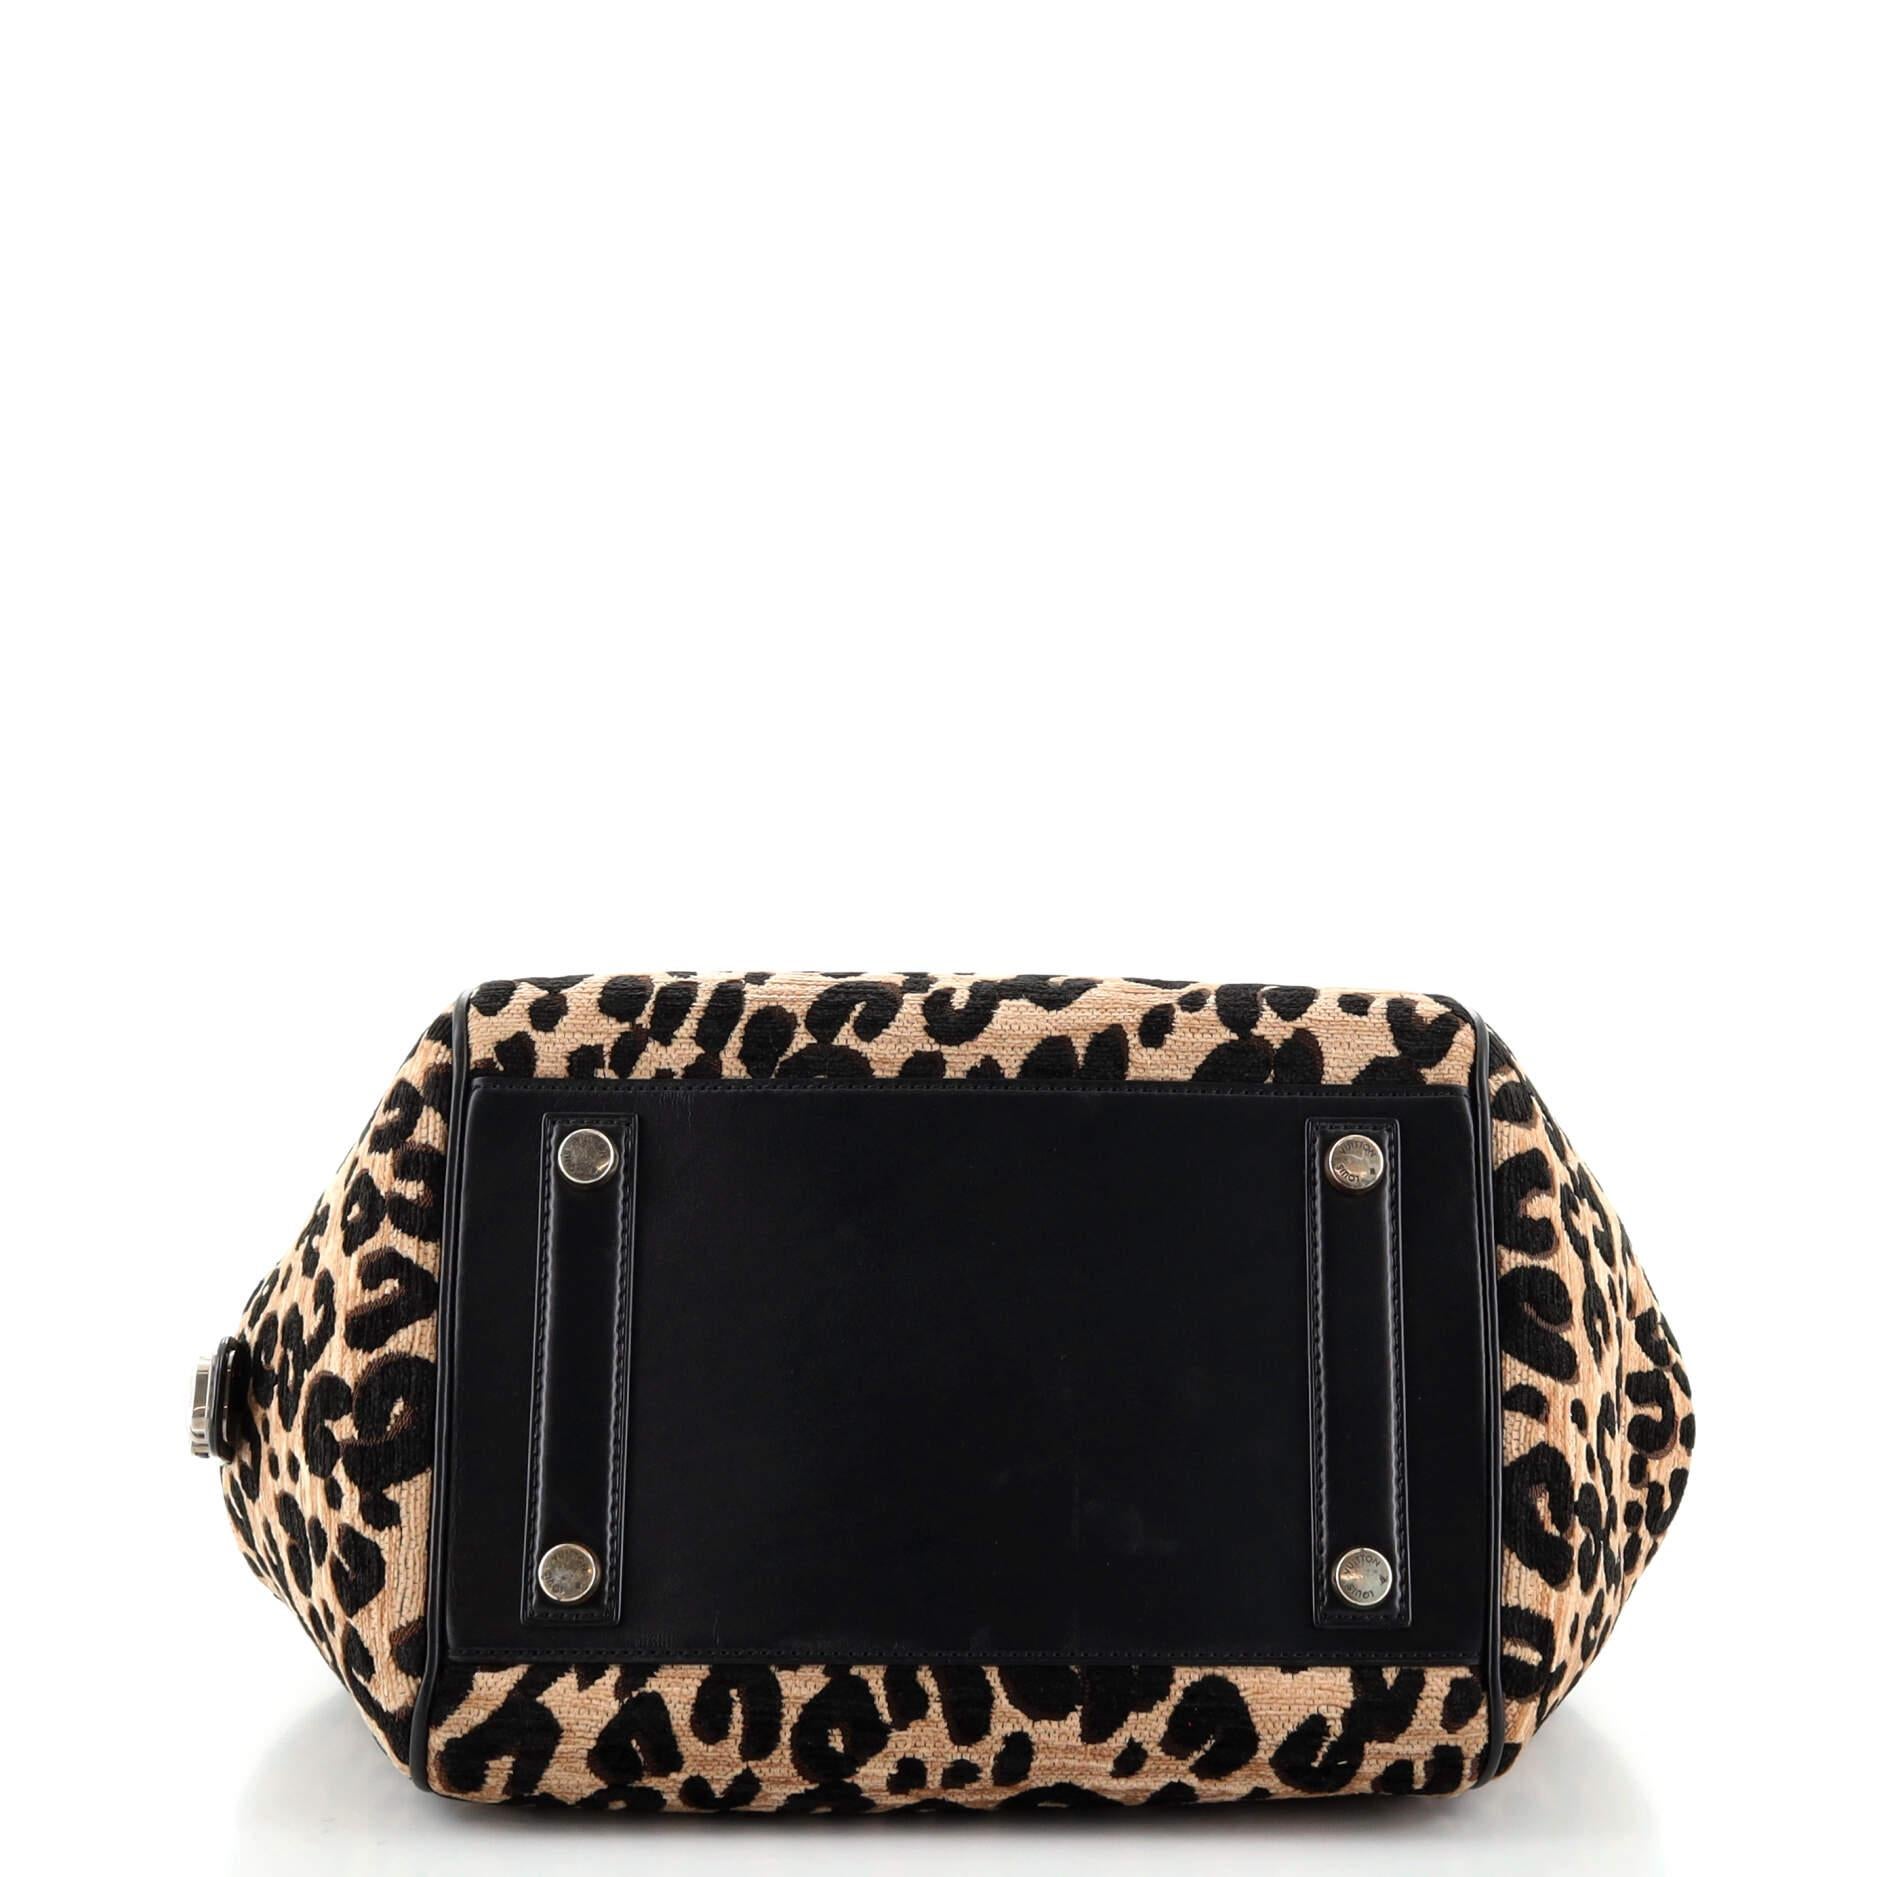 Black Louis Vuitton North South Bag Limited Edition Stephen Sprouse Leopard Che